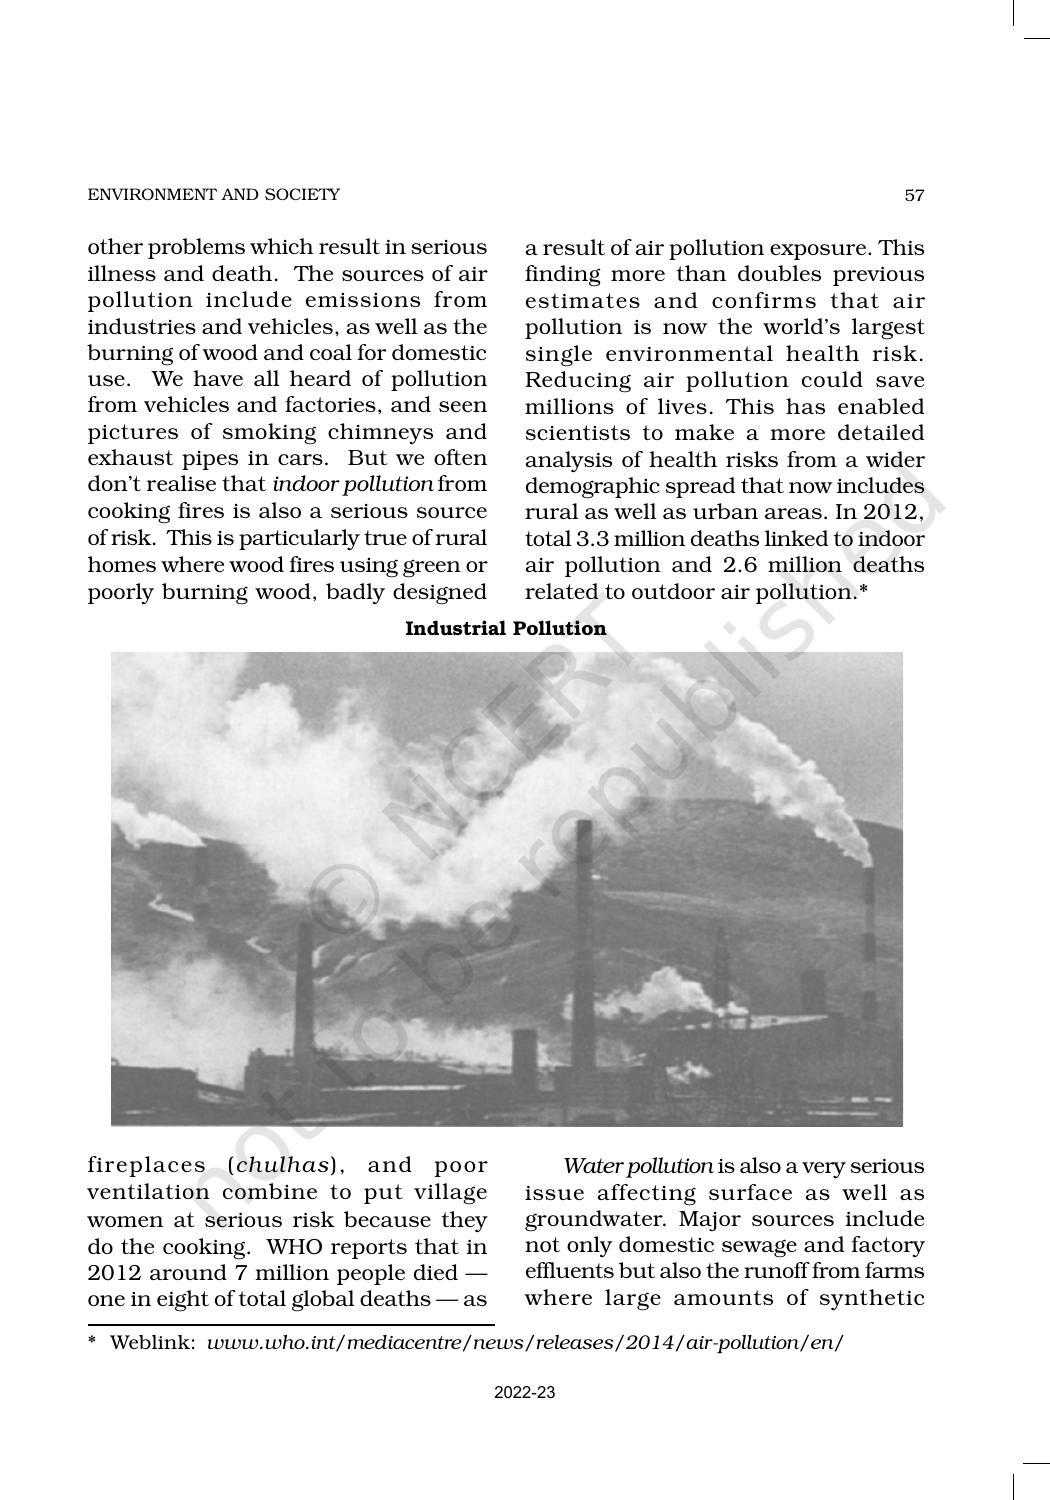 NCERT Book for Class 11 Sociology (Part-II) Chapter 3 Environment and Society - Page 8